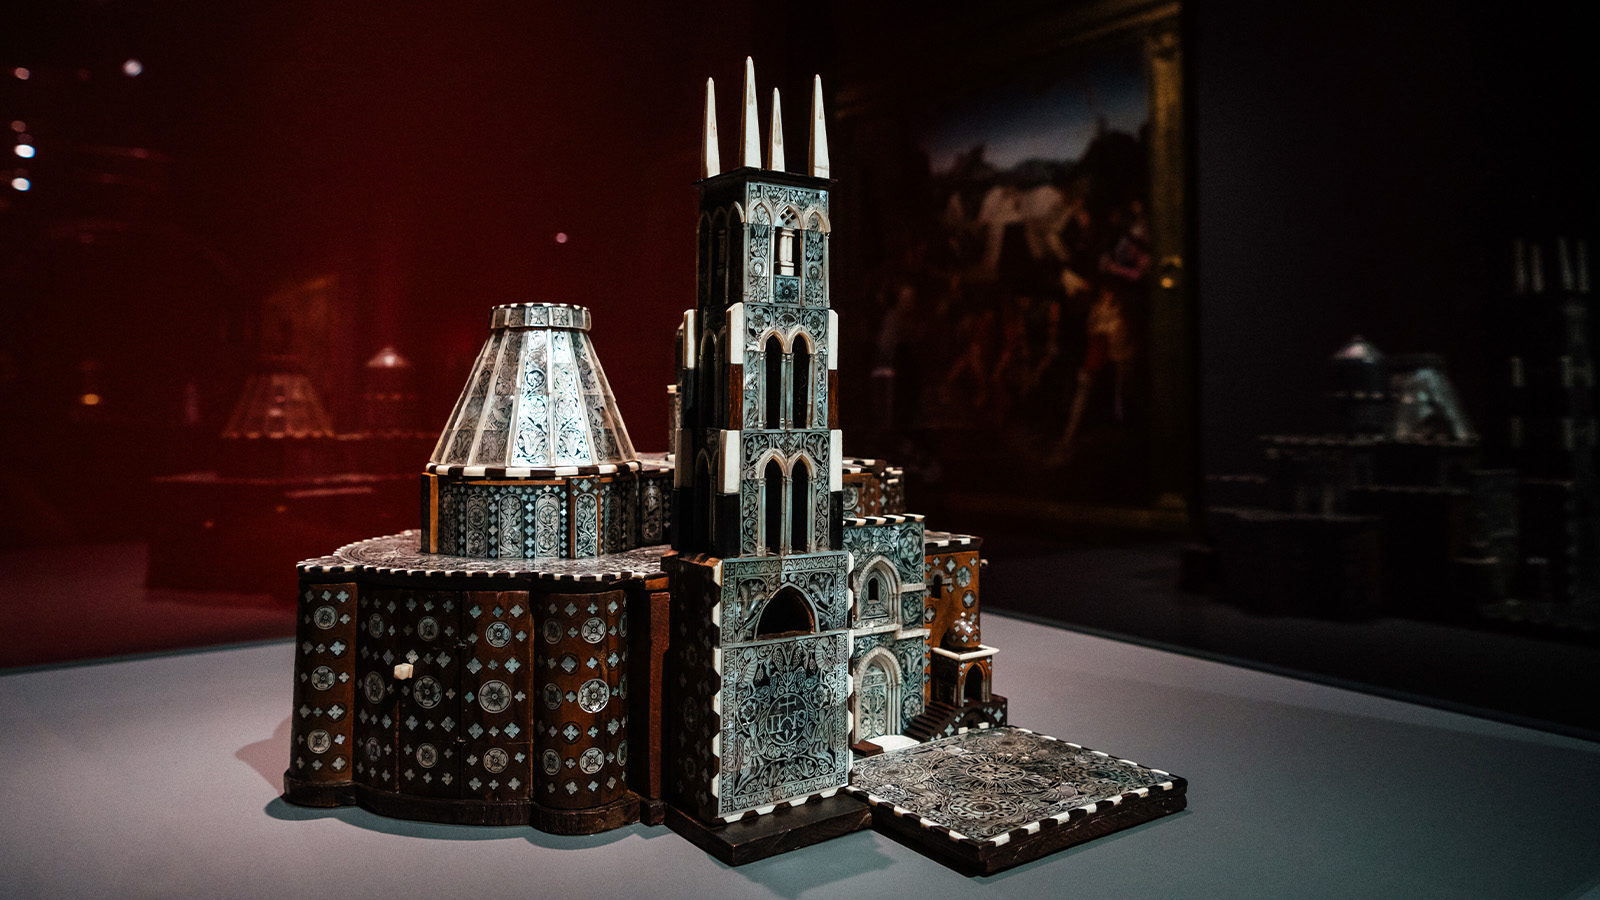 Model of the Basilica of the Holy Sepulchre. Bethlehem, c. 1700. Wood, mother-of-pearl and camel bone. Collection of George M. Al Ama, Bethlehem